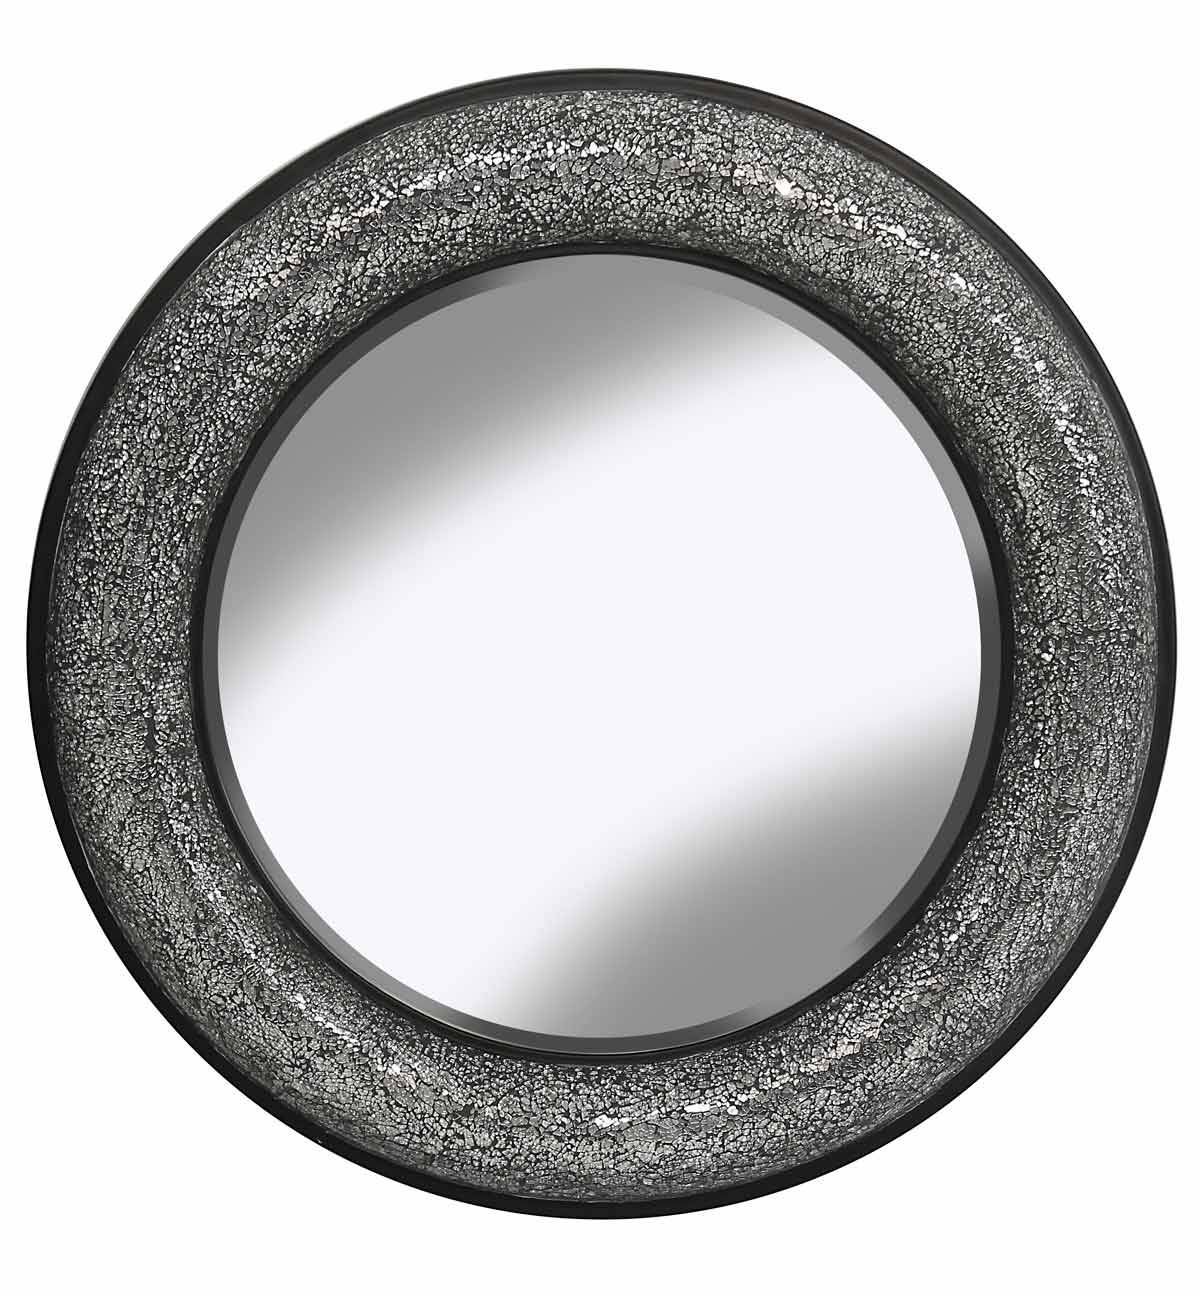 Mirror : Black And White Mosaic Wall Mirror In Black Mosaic Mirror Regarding Round Mosaic Wall Mirrors (View 14 of 15)